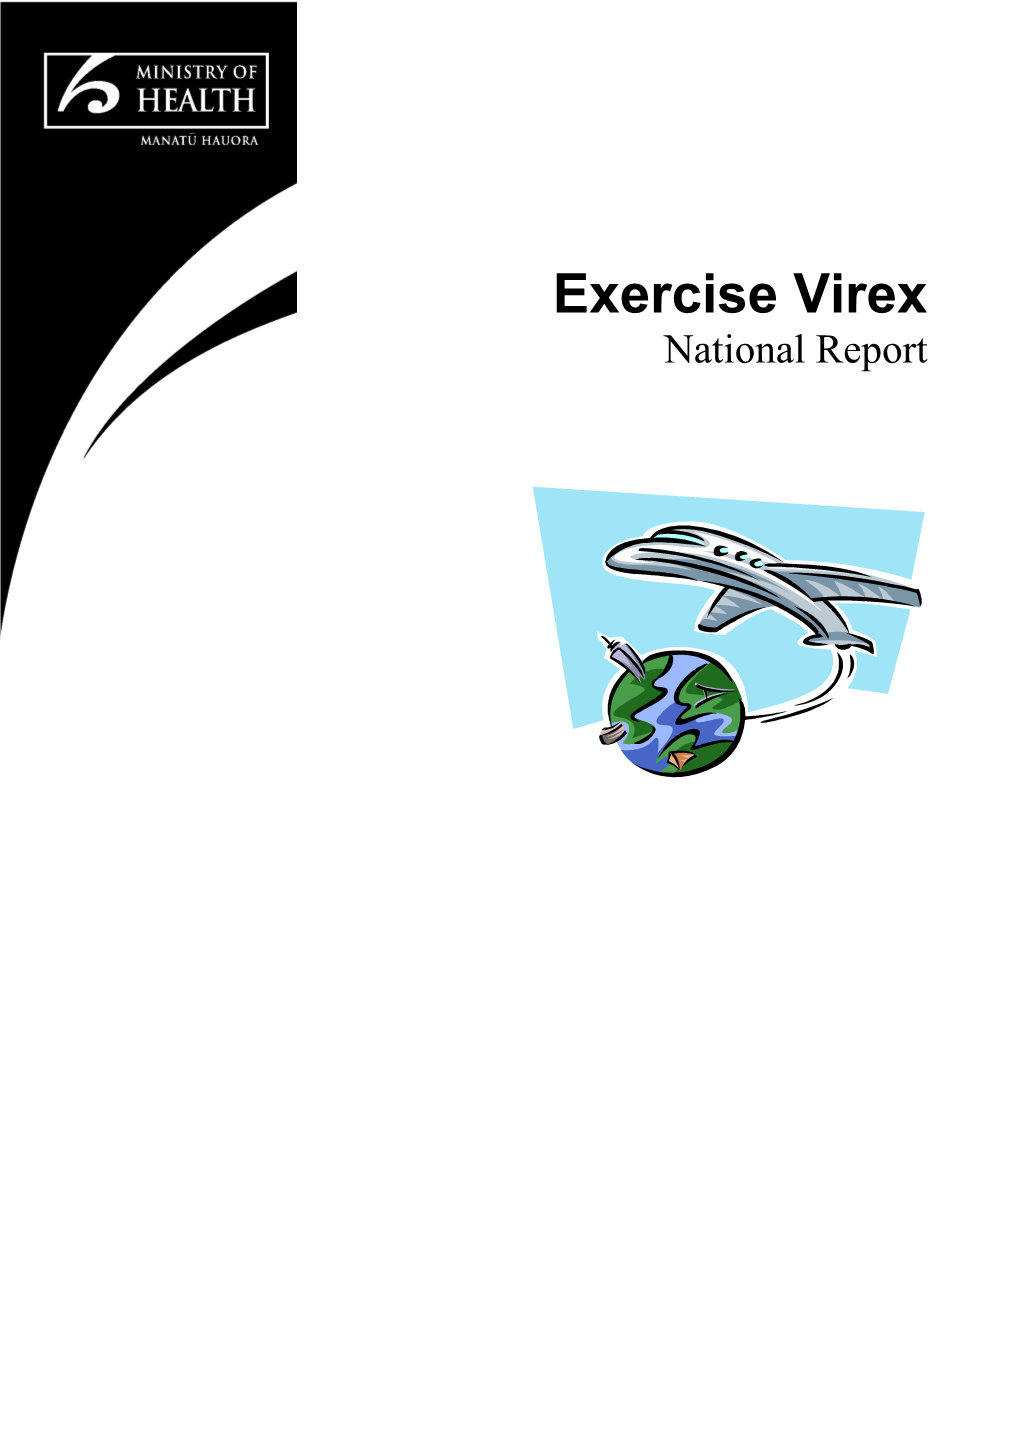 Exercise Virex - National Report